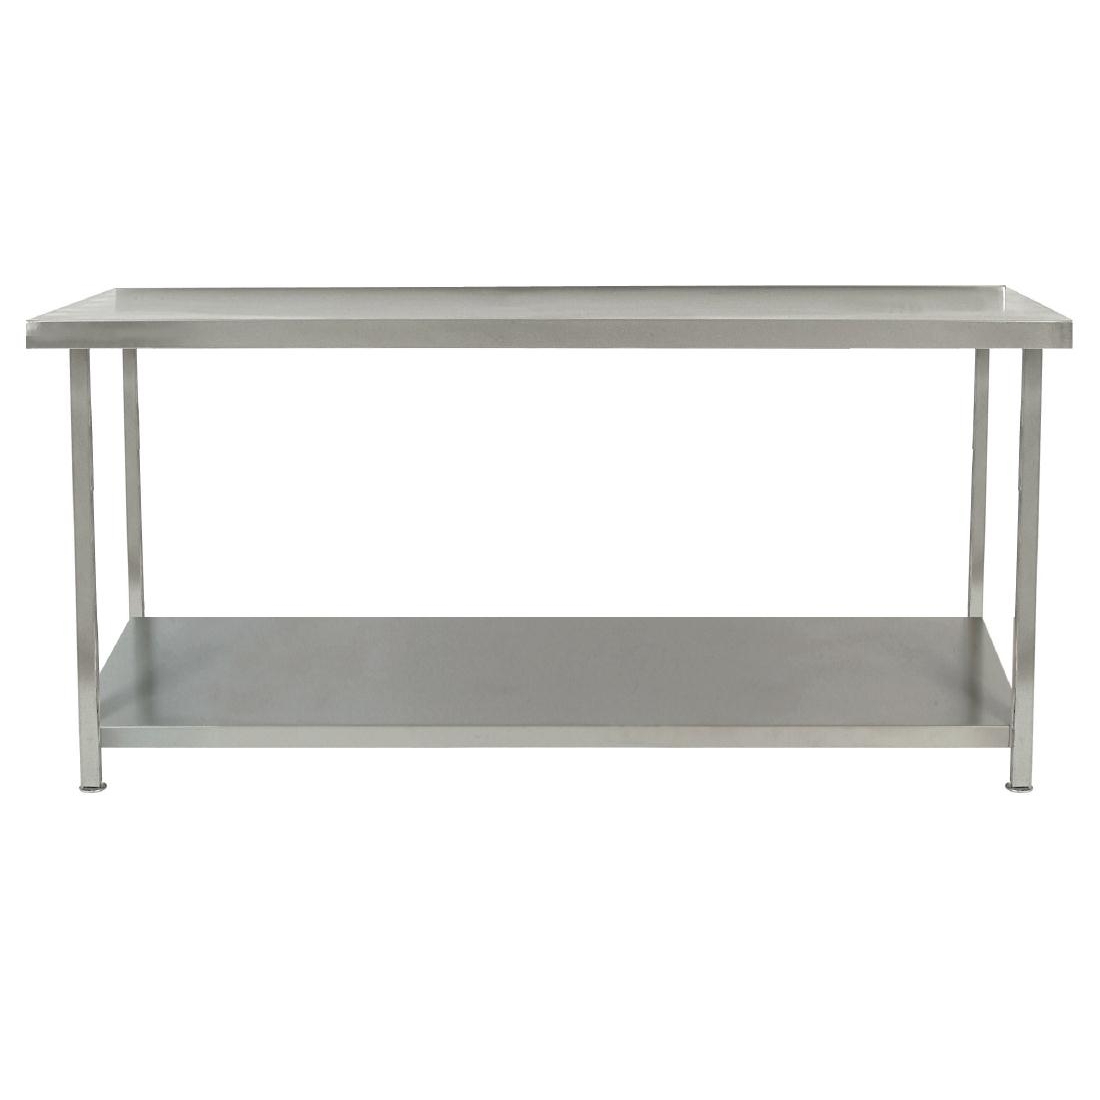 Parry Fully Welded Stainless Steel Centre Table with Undershelf 600x600mm